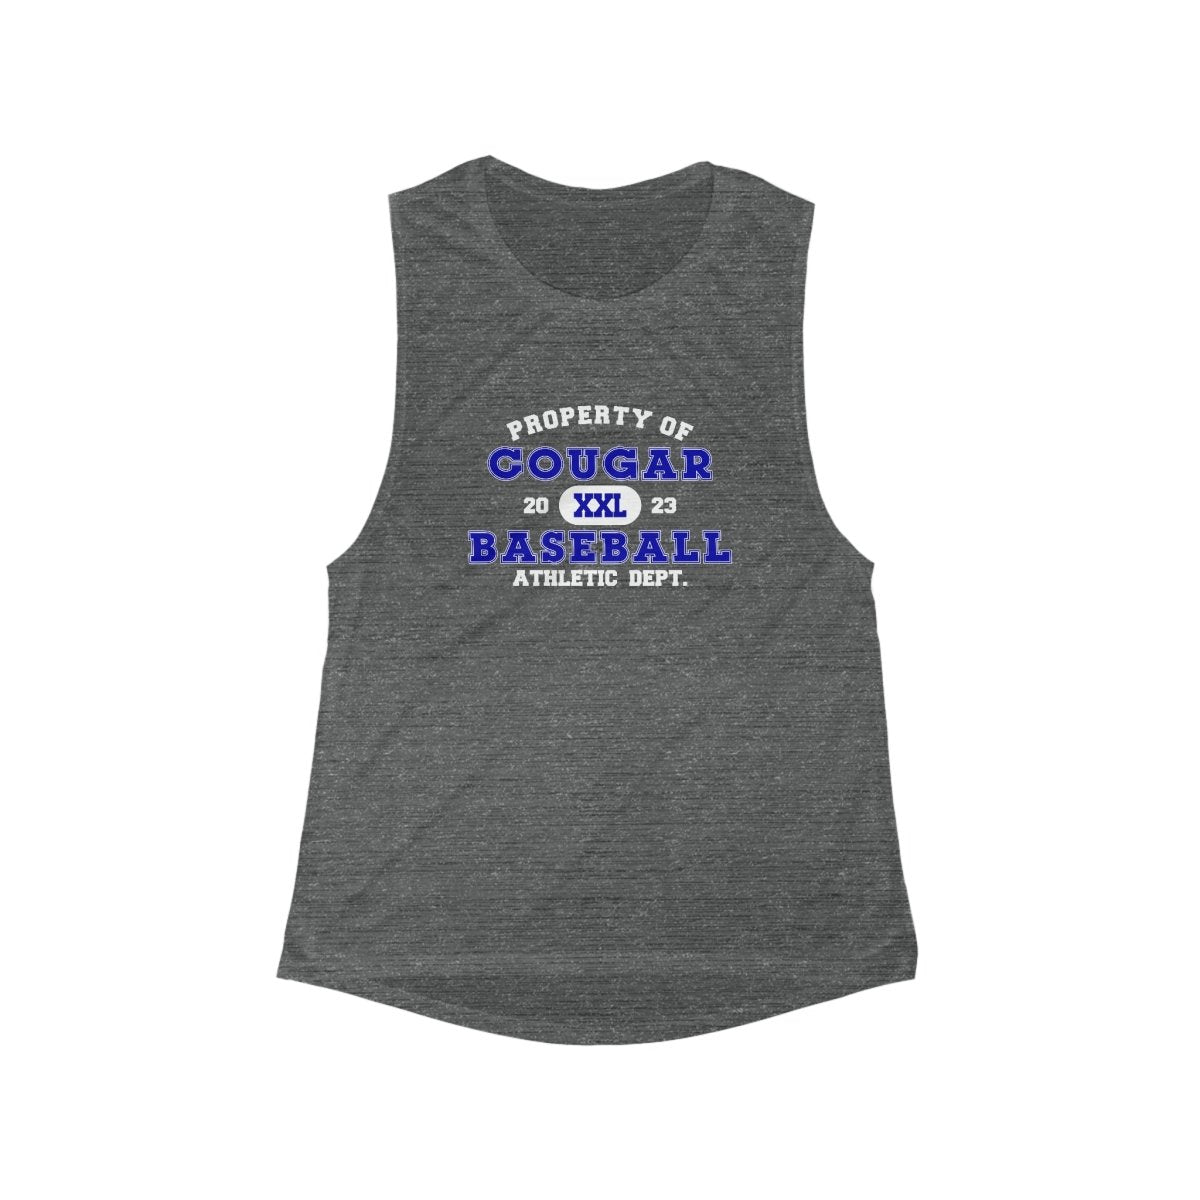 Property Of Cougars Women's Scoop Muscle Tank